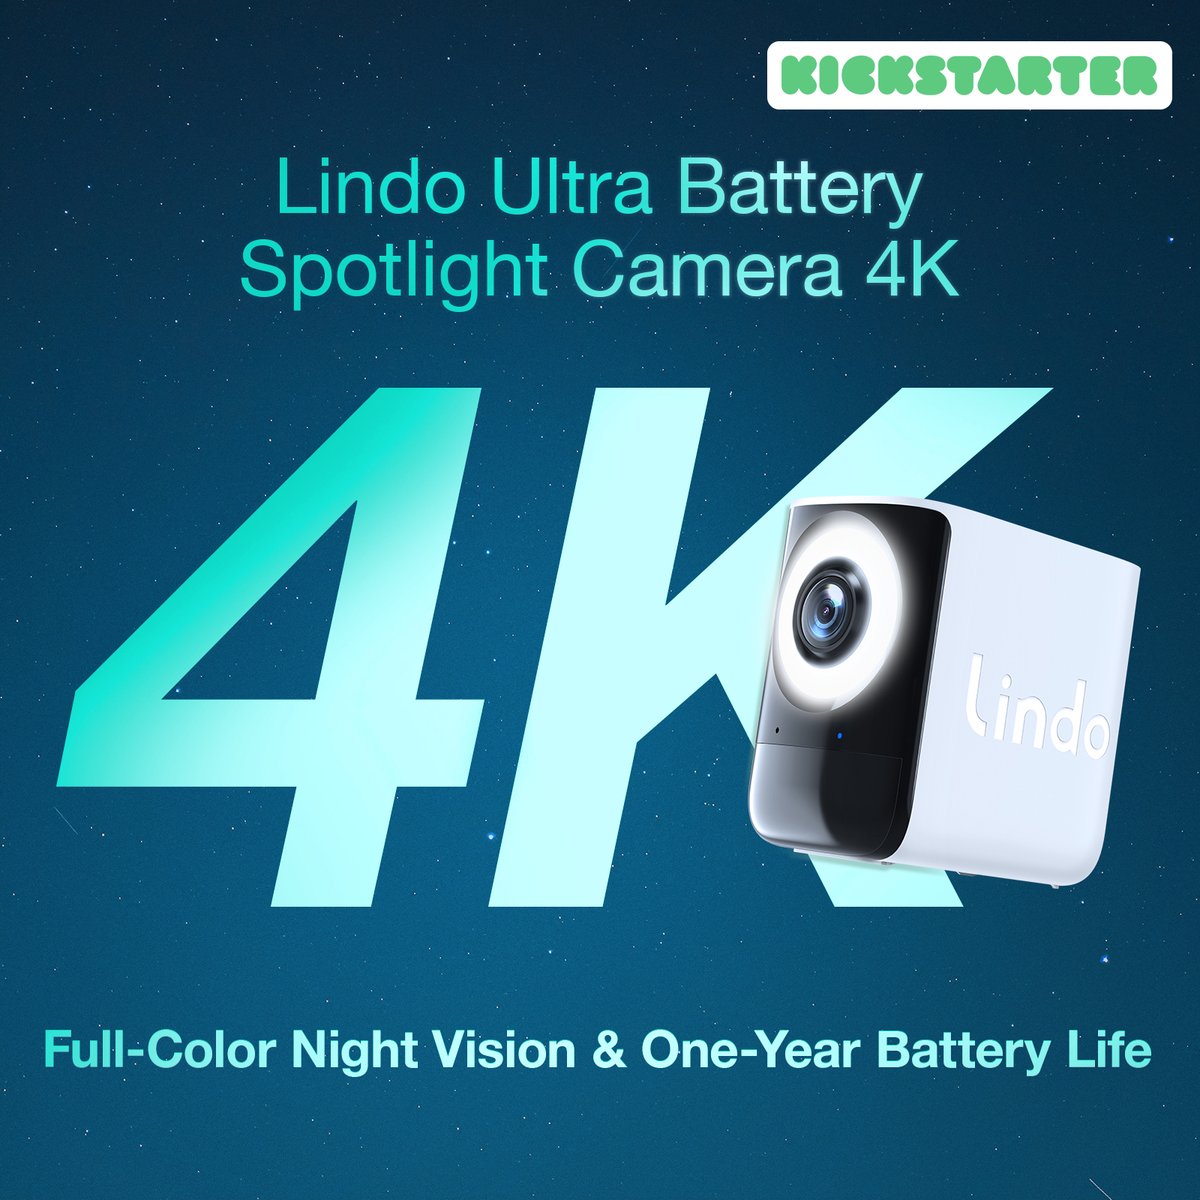 Exciting News! 🚀 Our Kickstarter journey has officially kicked off! 🌟 Become an early supporter for Lindo Ultra 4K Spotlight Camera. 🎥✨ Early backers get exclusive 50% discount! 🎁 
kickstarter.com/projects/lindo…
#Kickstarter